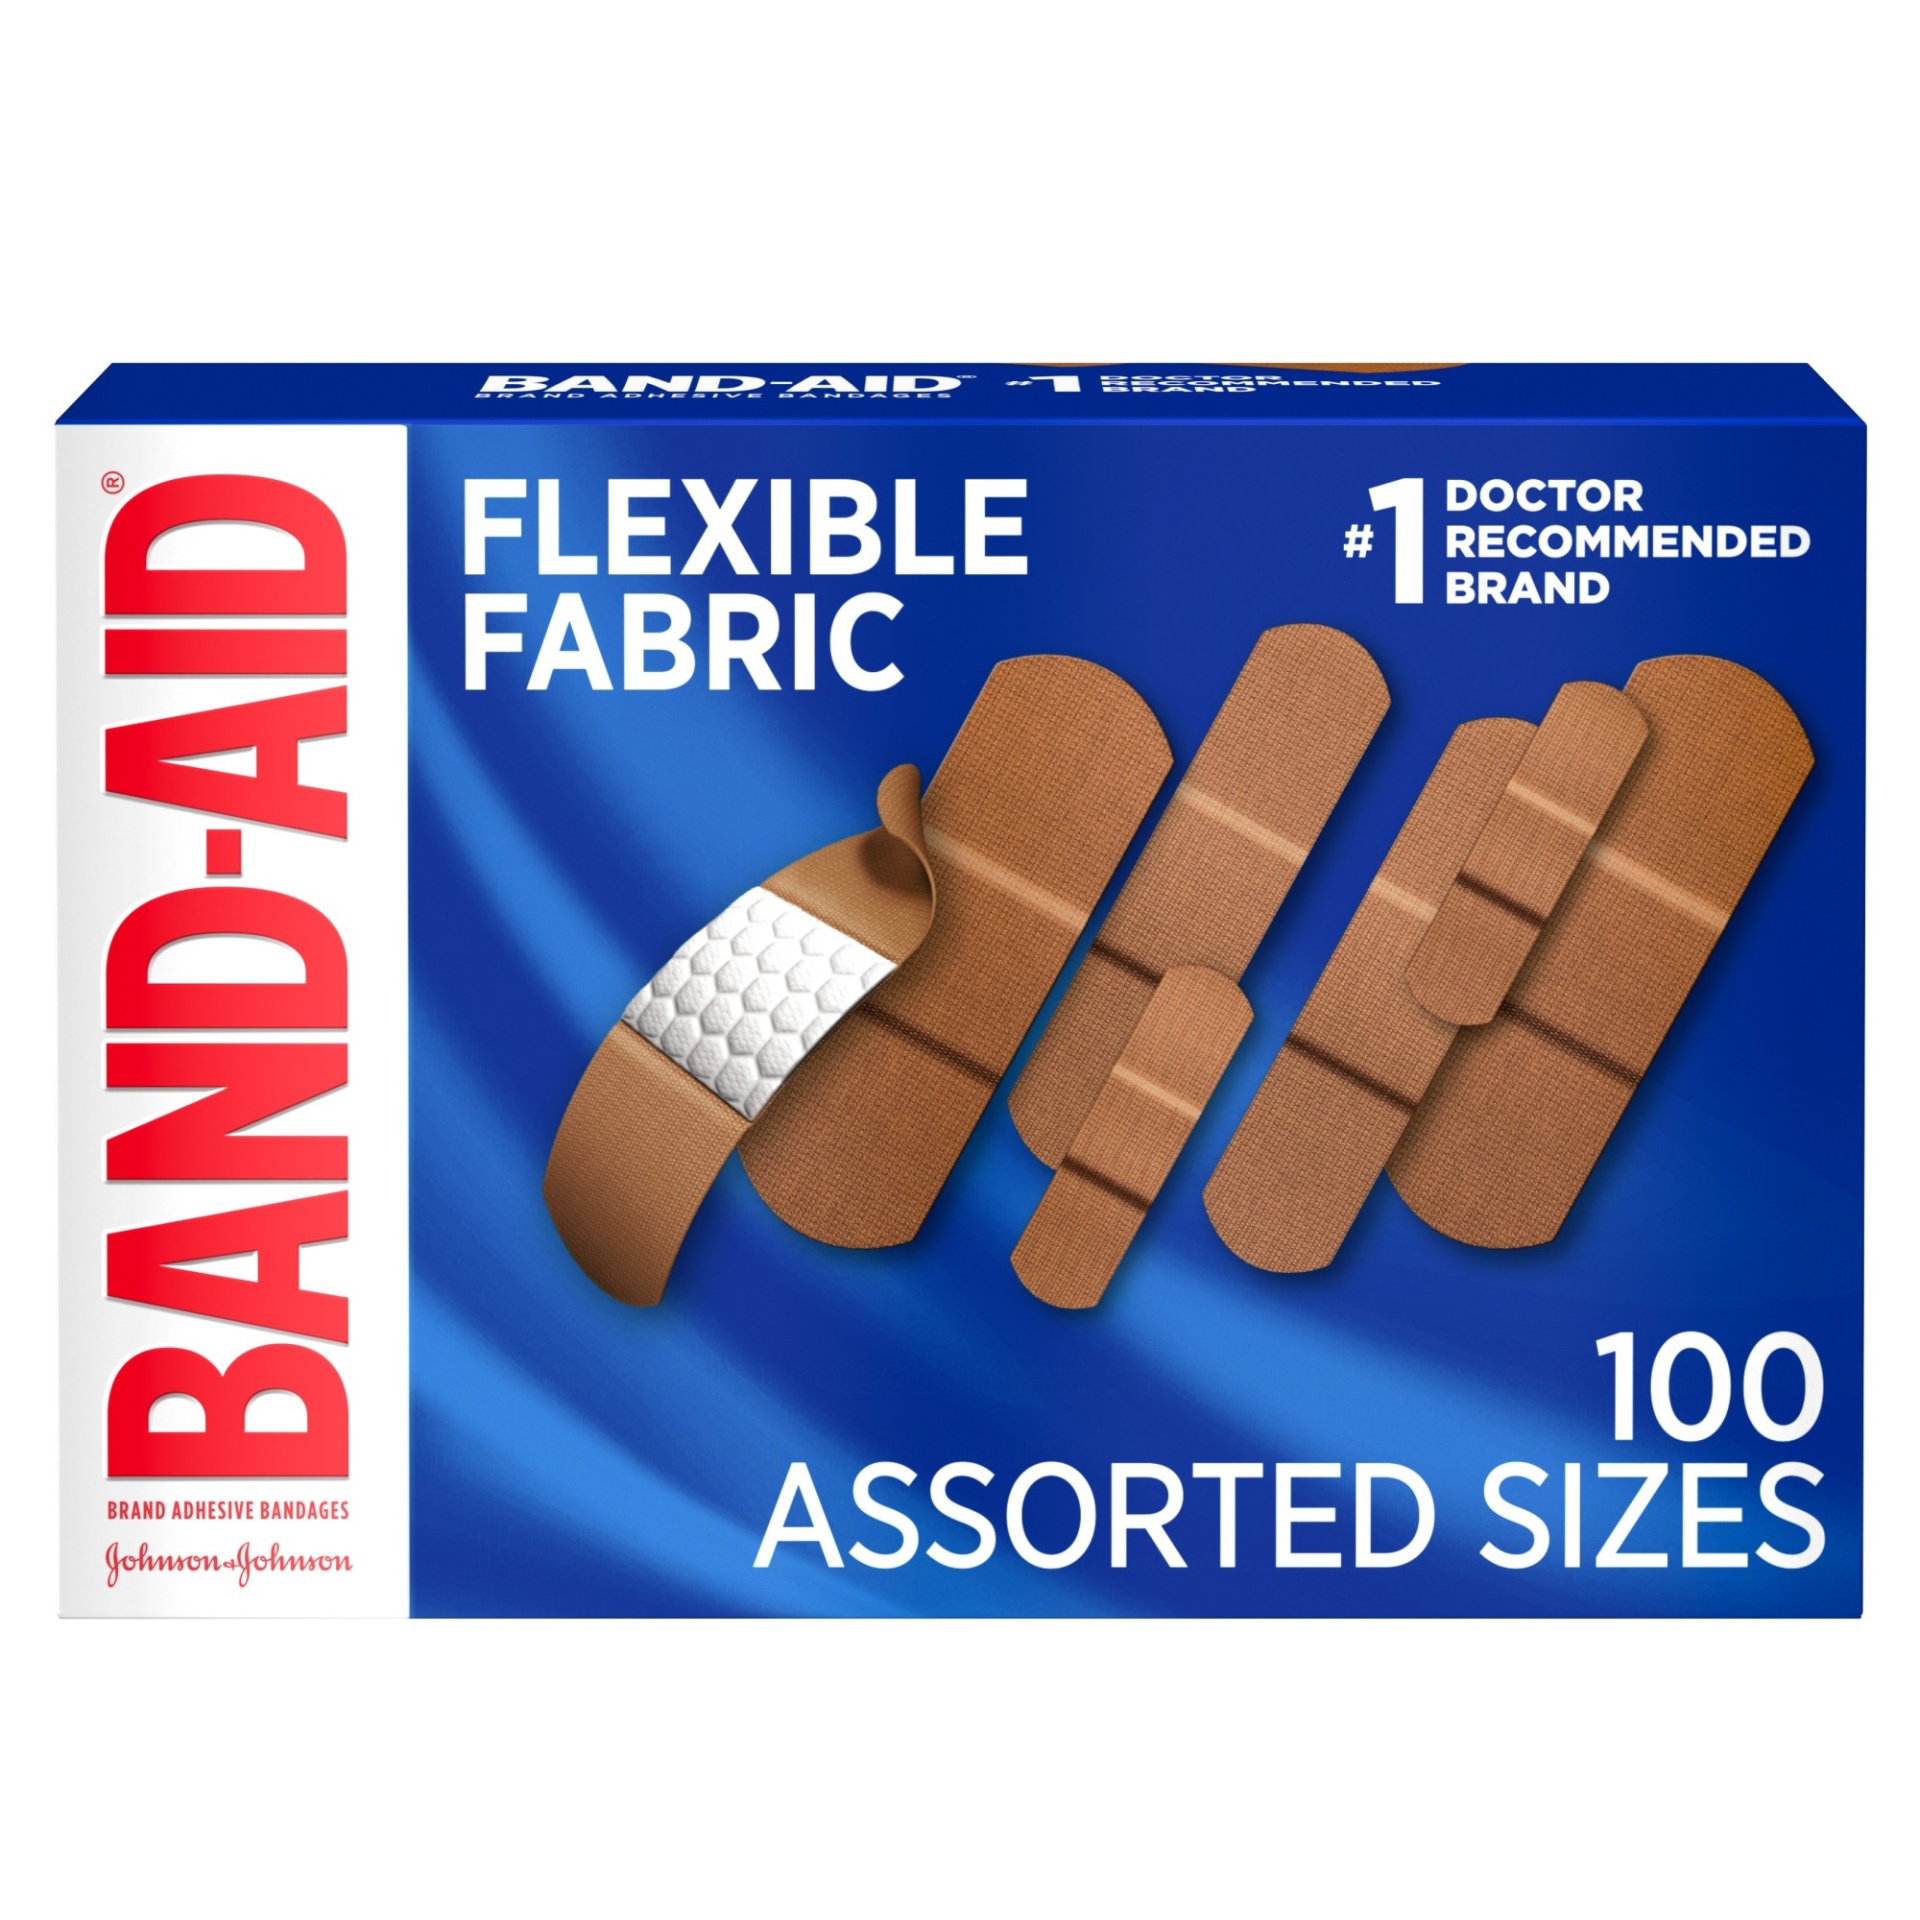 slide 1 of 8, Band-Aid Brand Flexible Fabric Adhesive Bandages, Comfortable Sterile Protection & Wound Care for Minor Cuts & Burns, Quilt-Aid Technology to Cushion Painful Wounds, Assorted Sizes, 100 ct